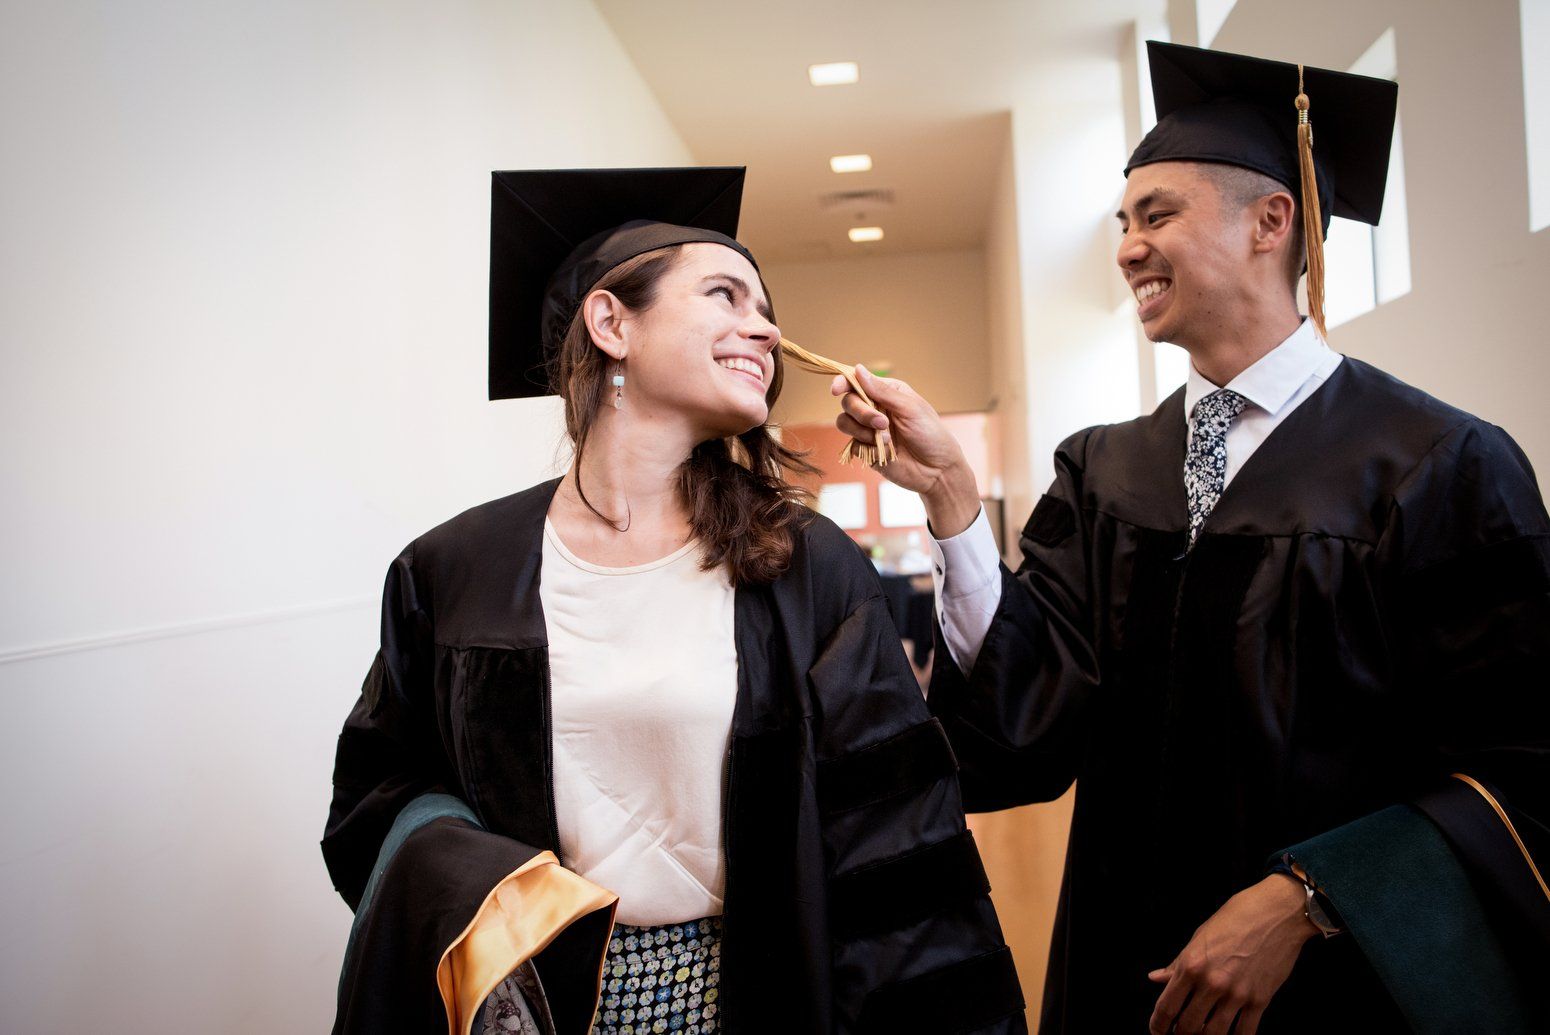 Two students wearing graduation robes